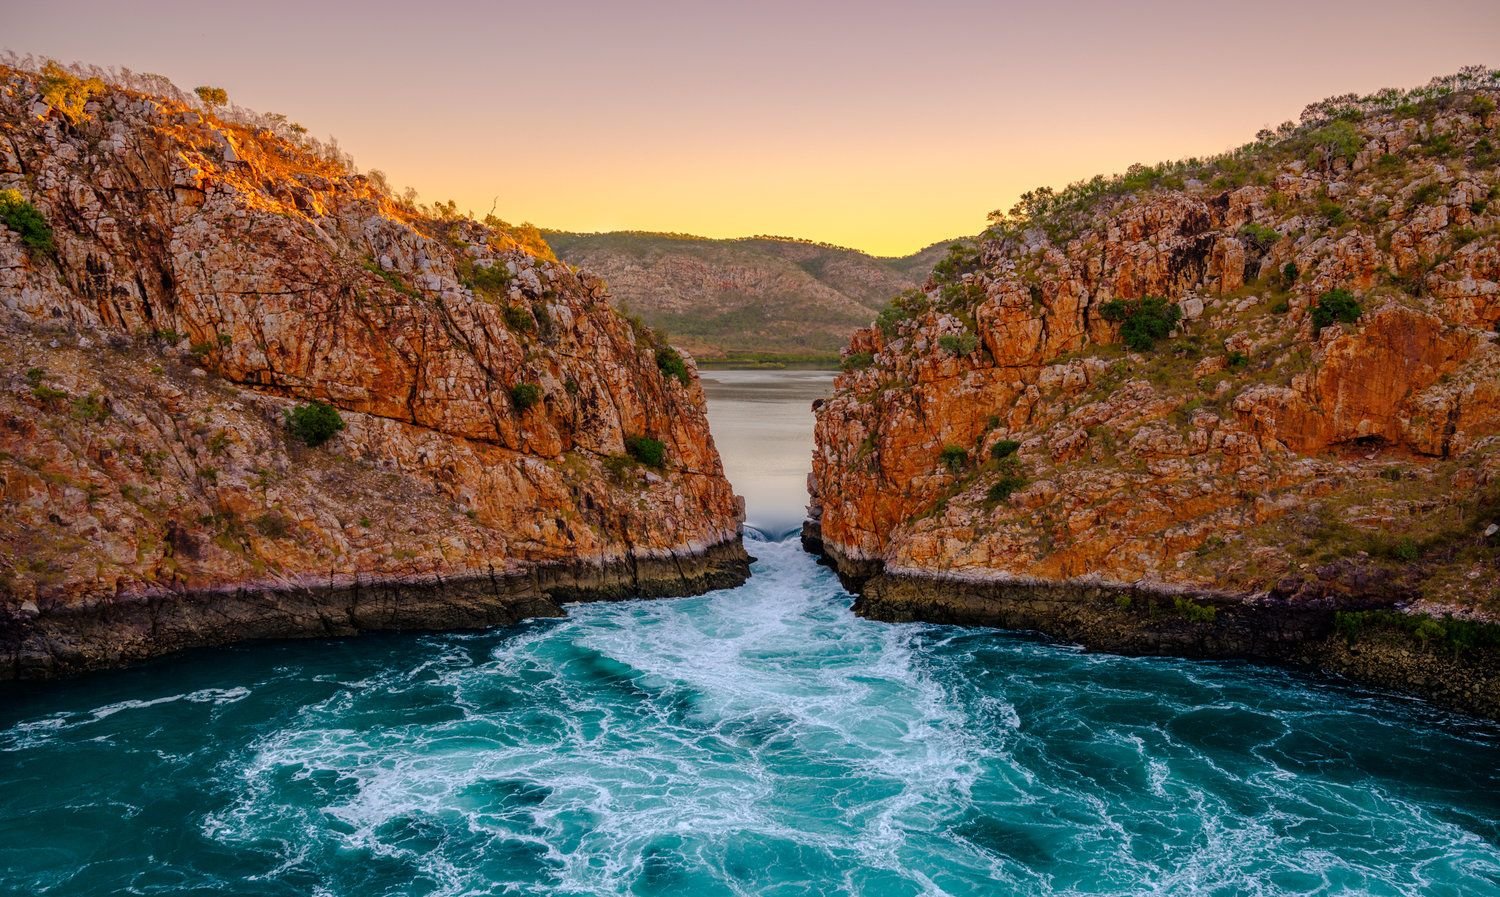 Tours To Kimberley: A Comprehensive Guide To Planning Your Dream Tour